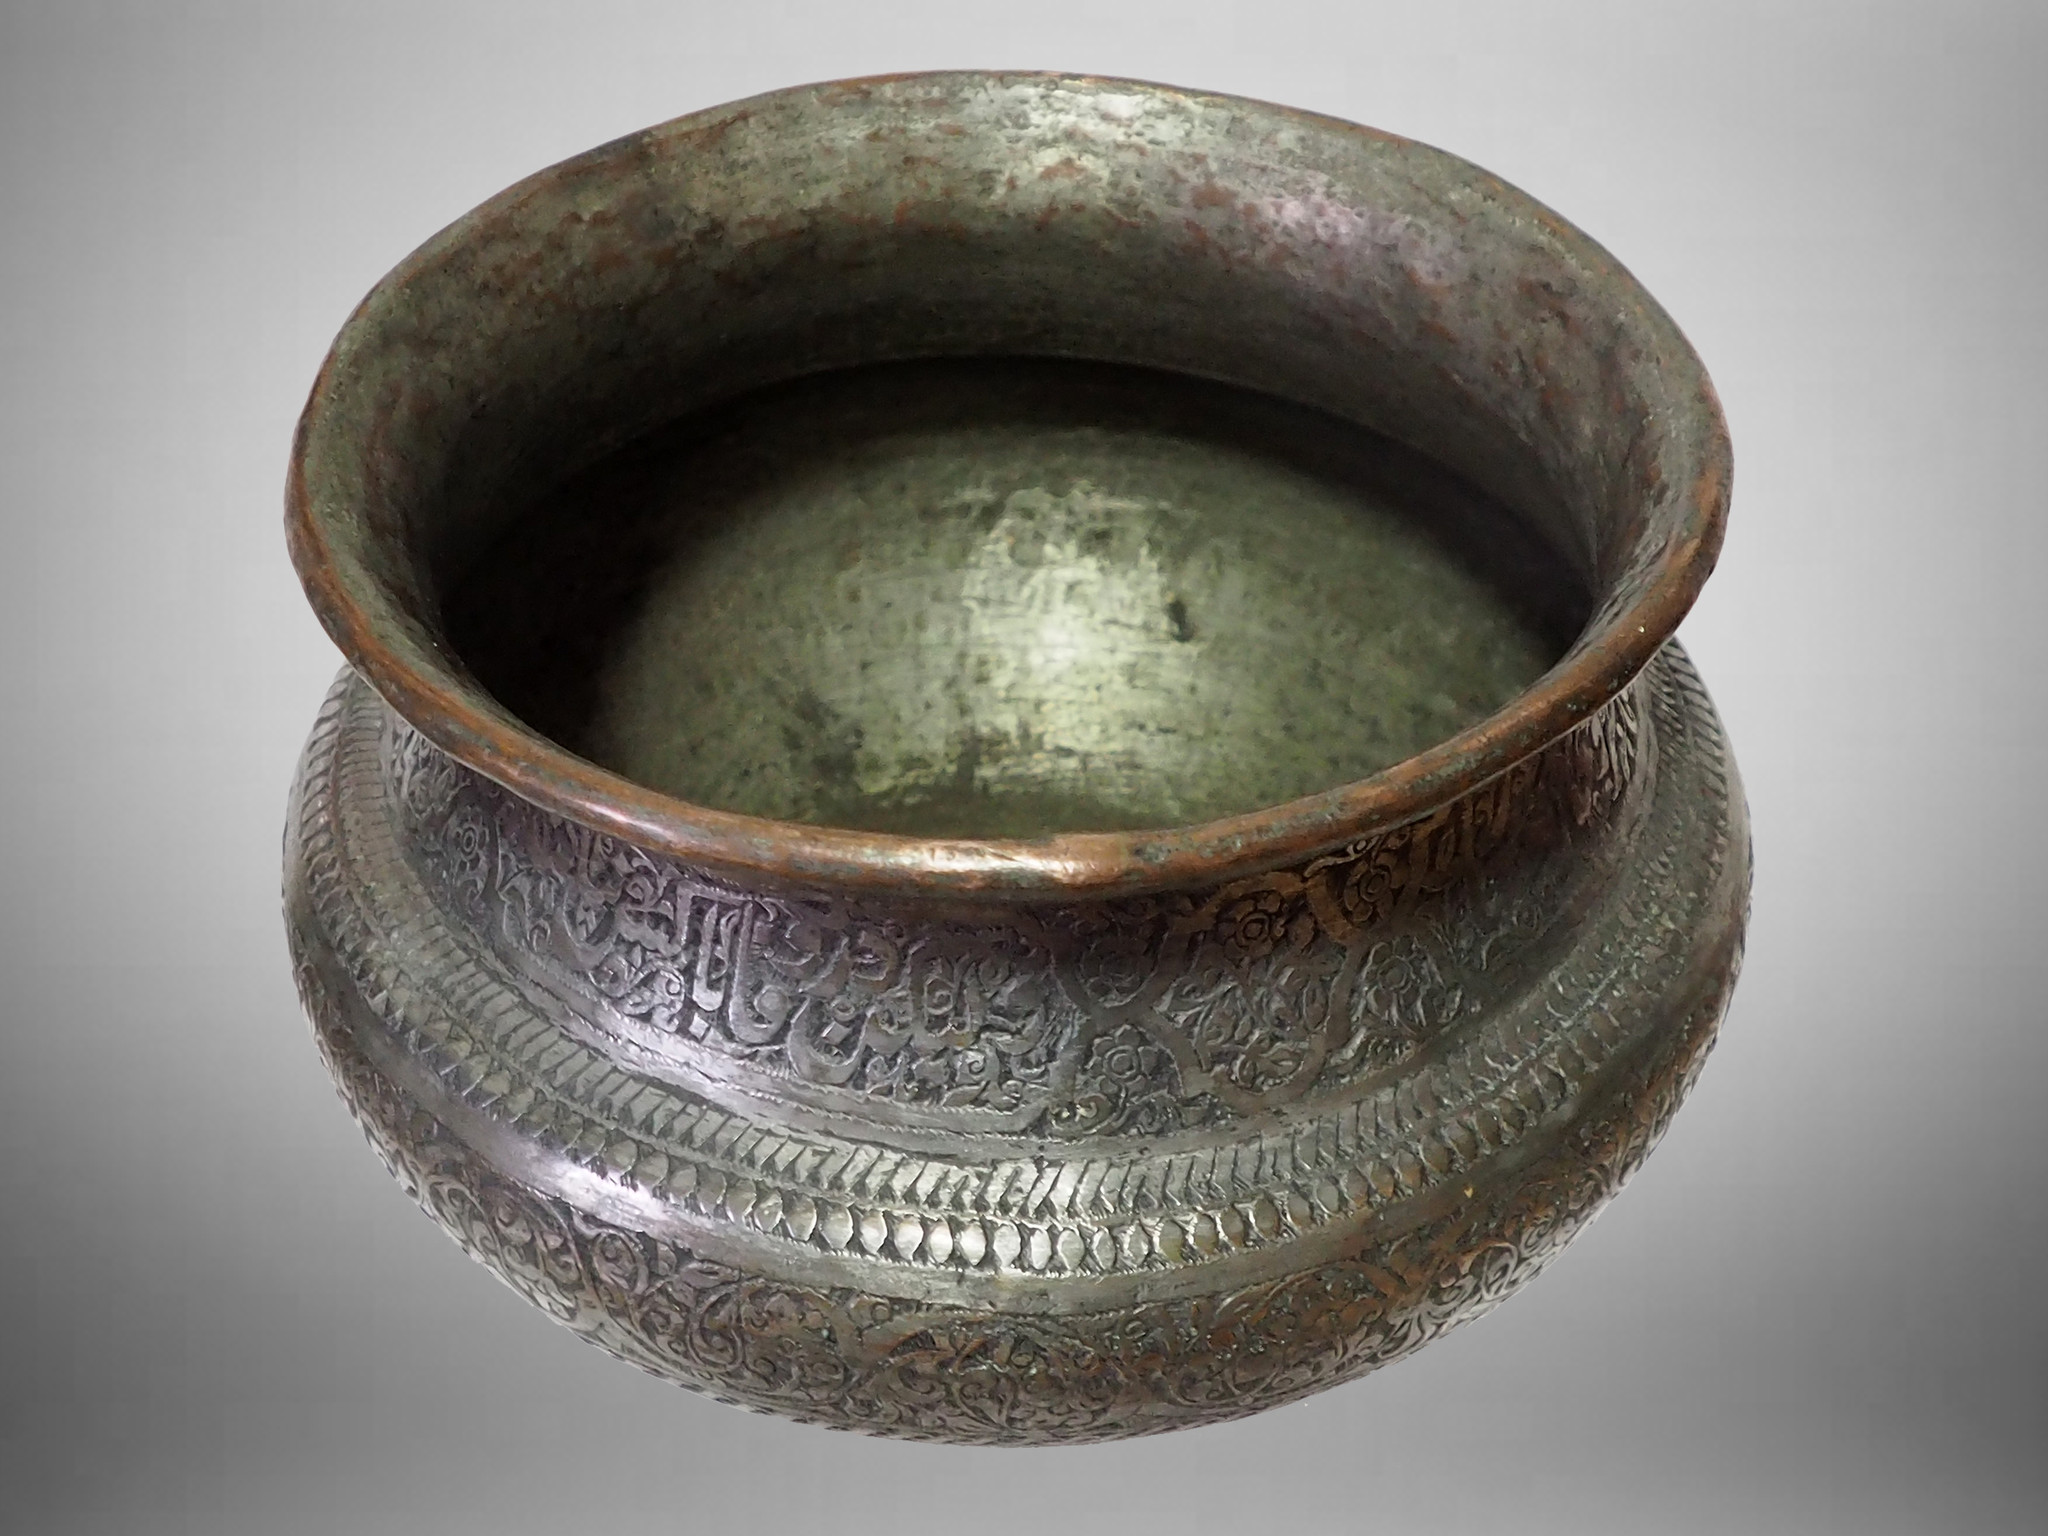 Antique Engraved Large islamic Tinned Copper  Bowl, 18/19th C. from Afghanistan tas No:21A